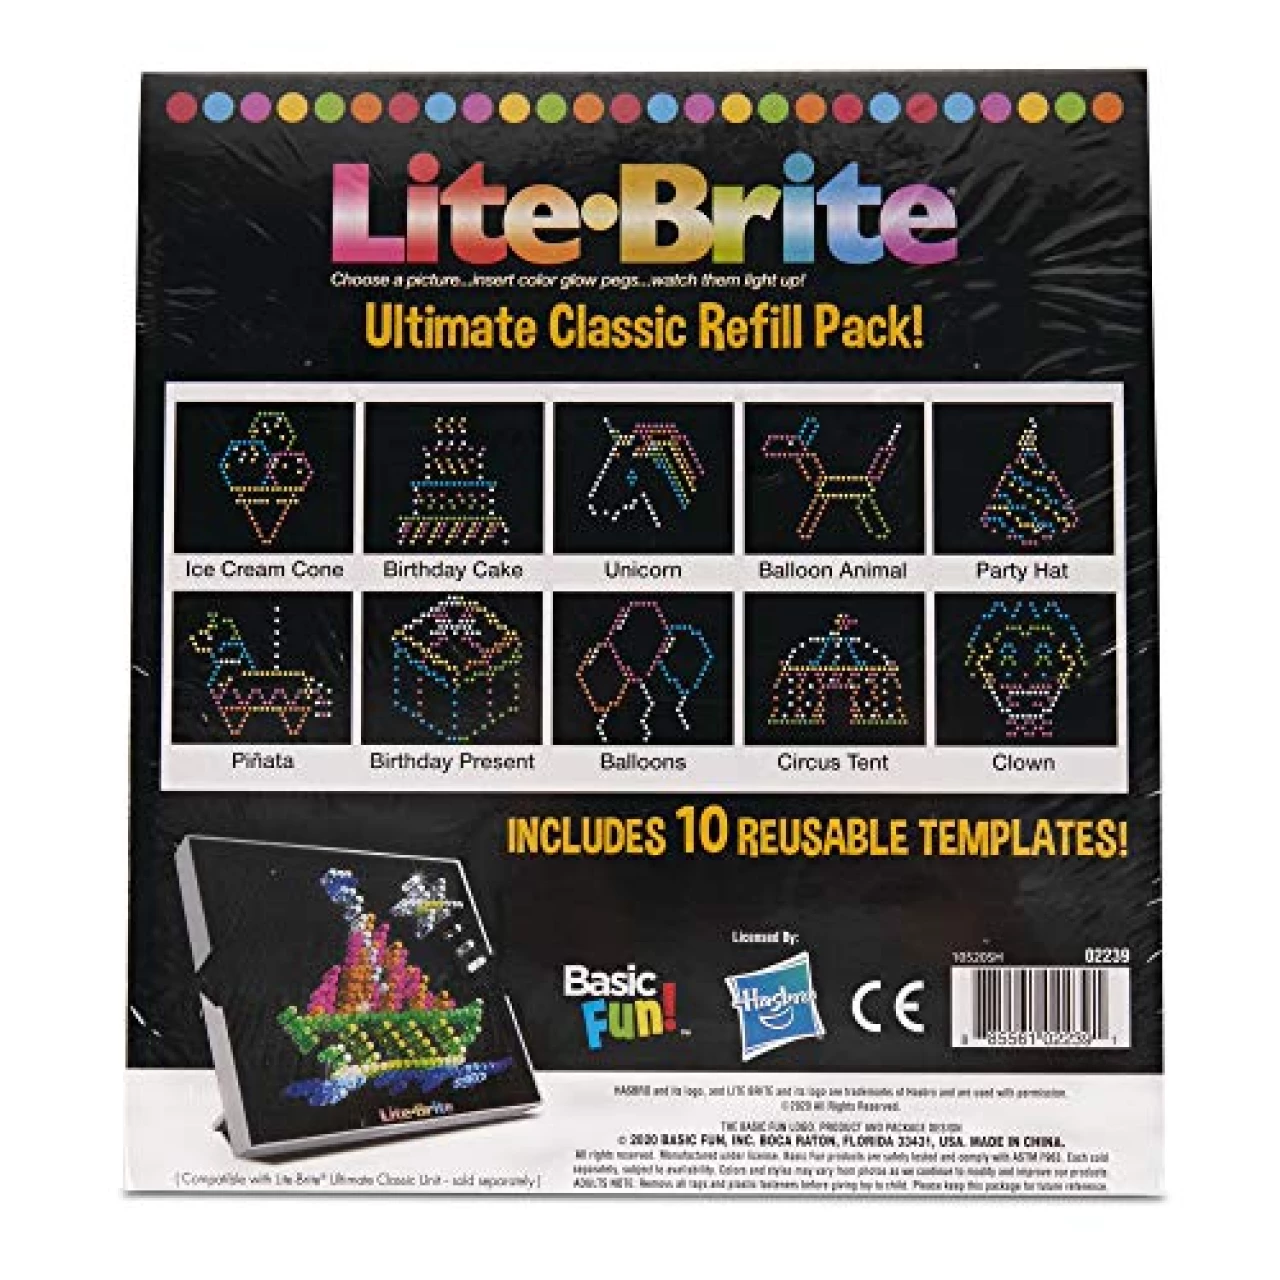 Lite Brite Ultimate Classic Party Refill Pack - Celebration Theme